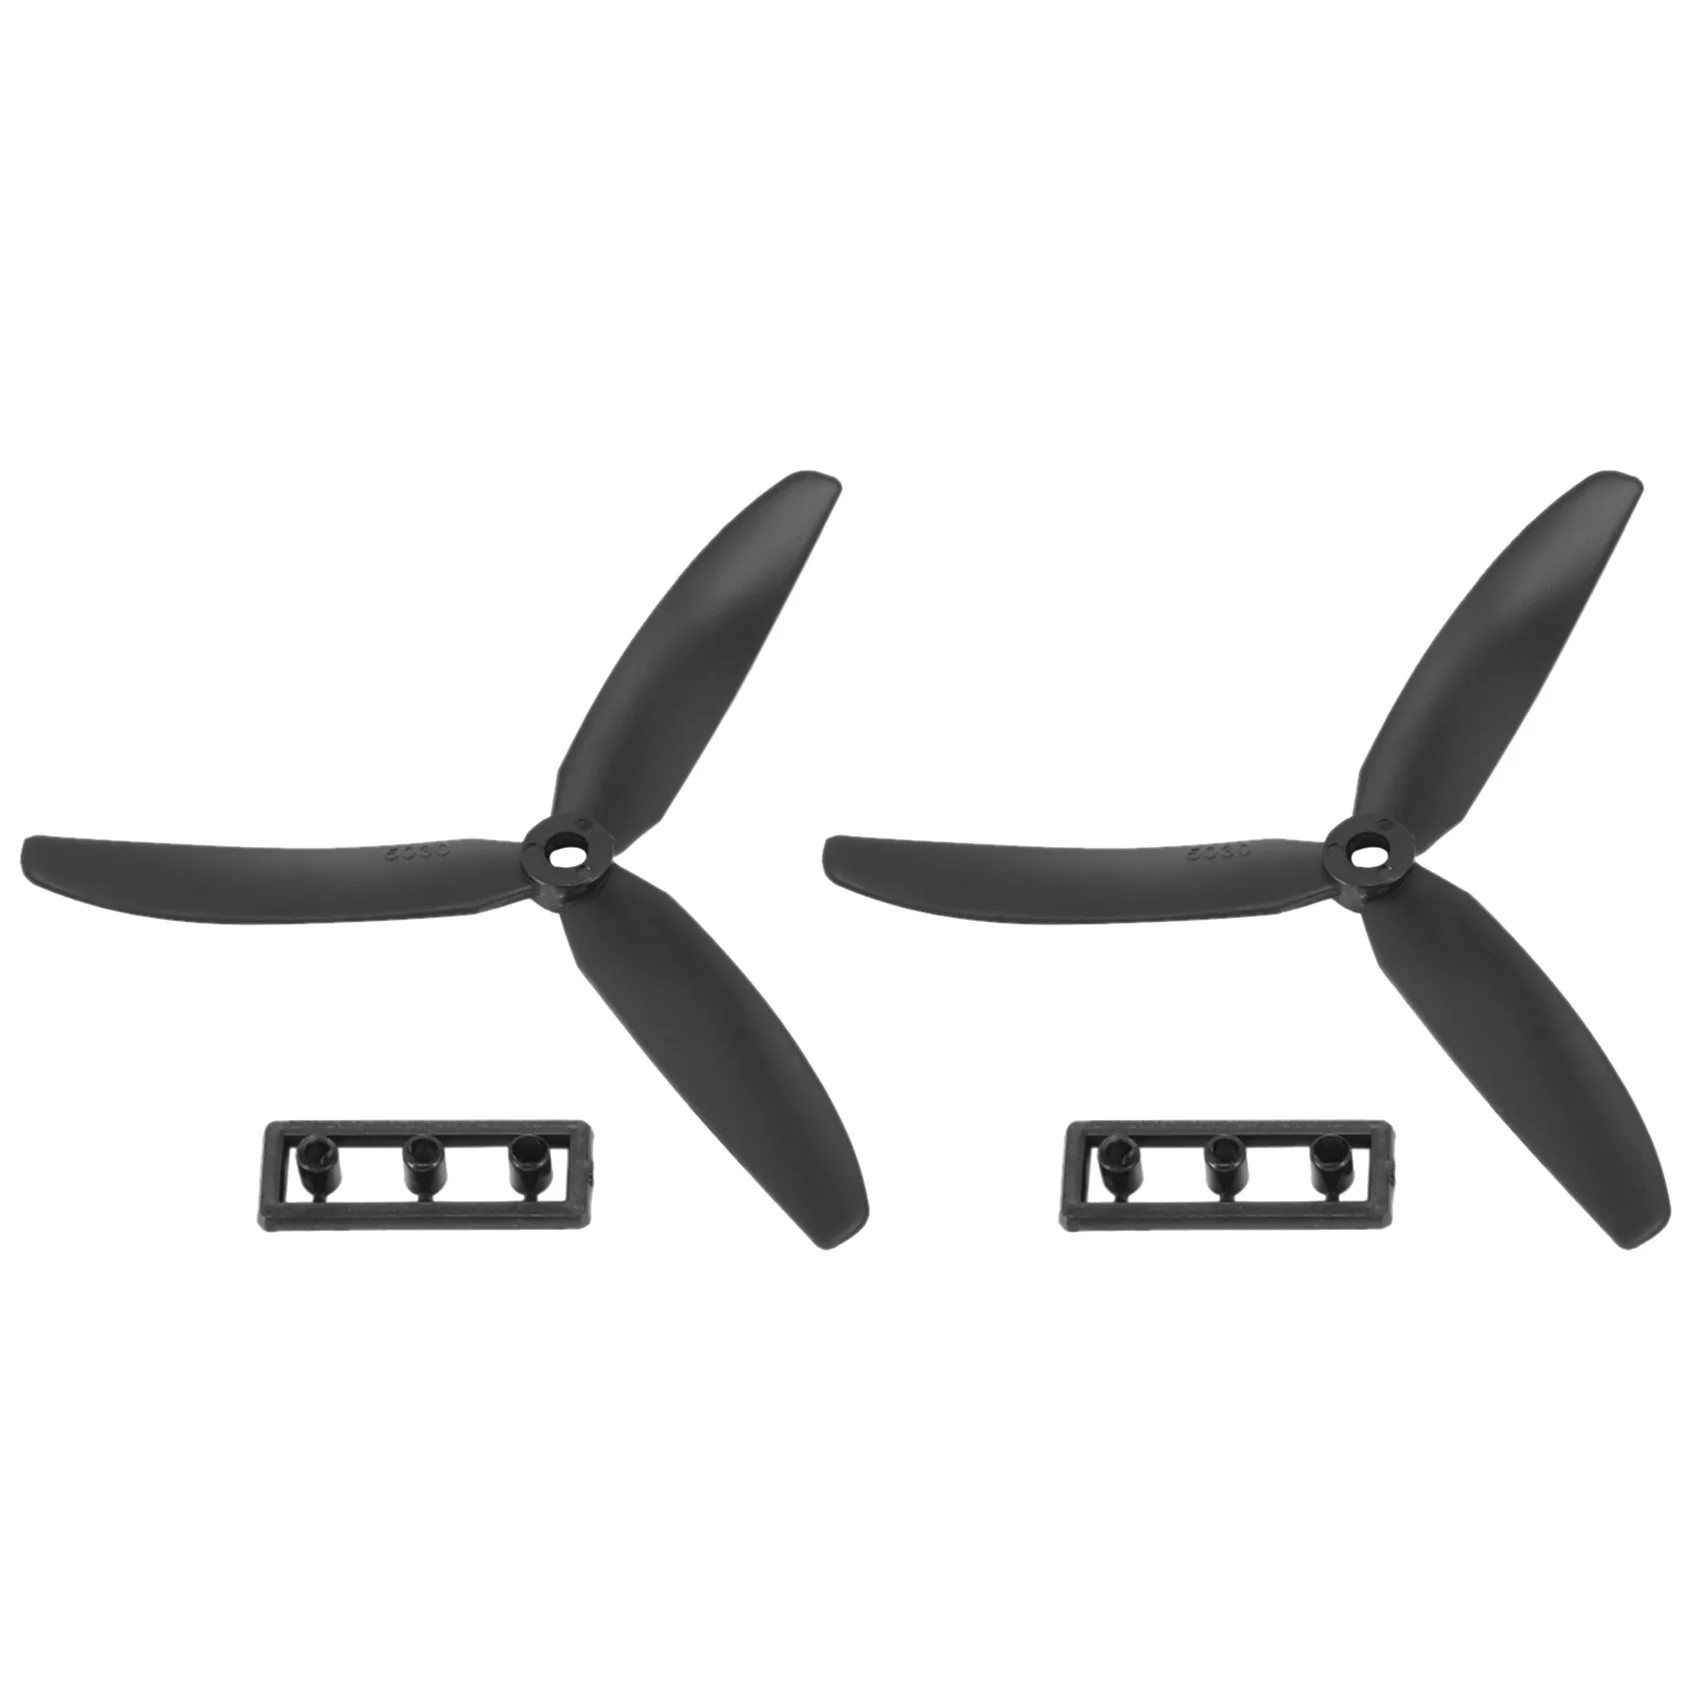 

1 pair 5030 3-Blades Direct Drive Propeller Prop CW/CCW for RC Airplane Aircraft (Black)